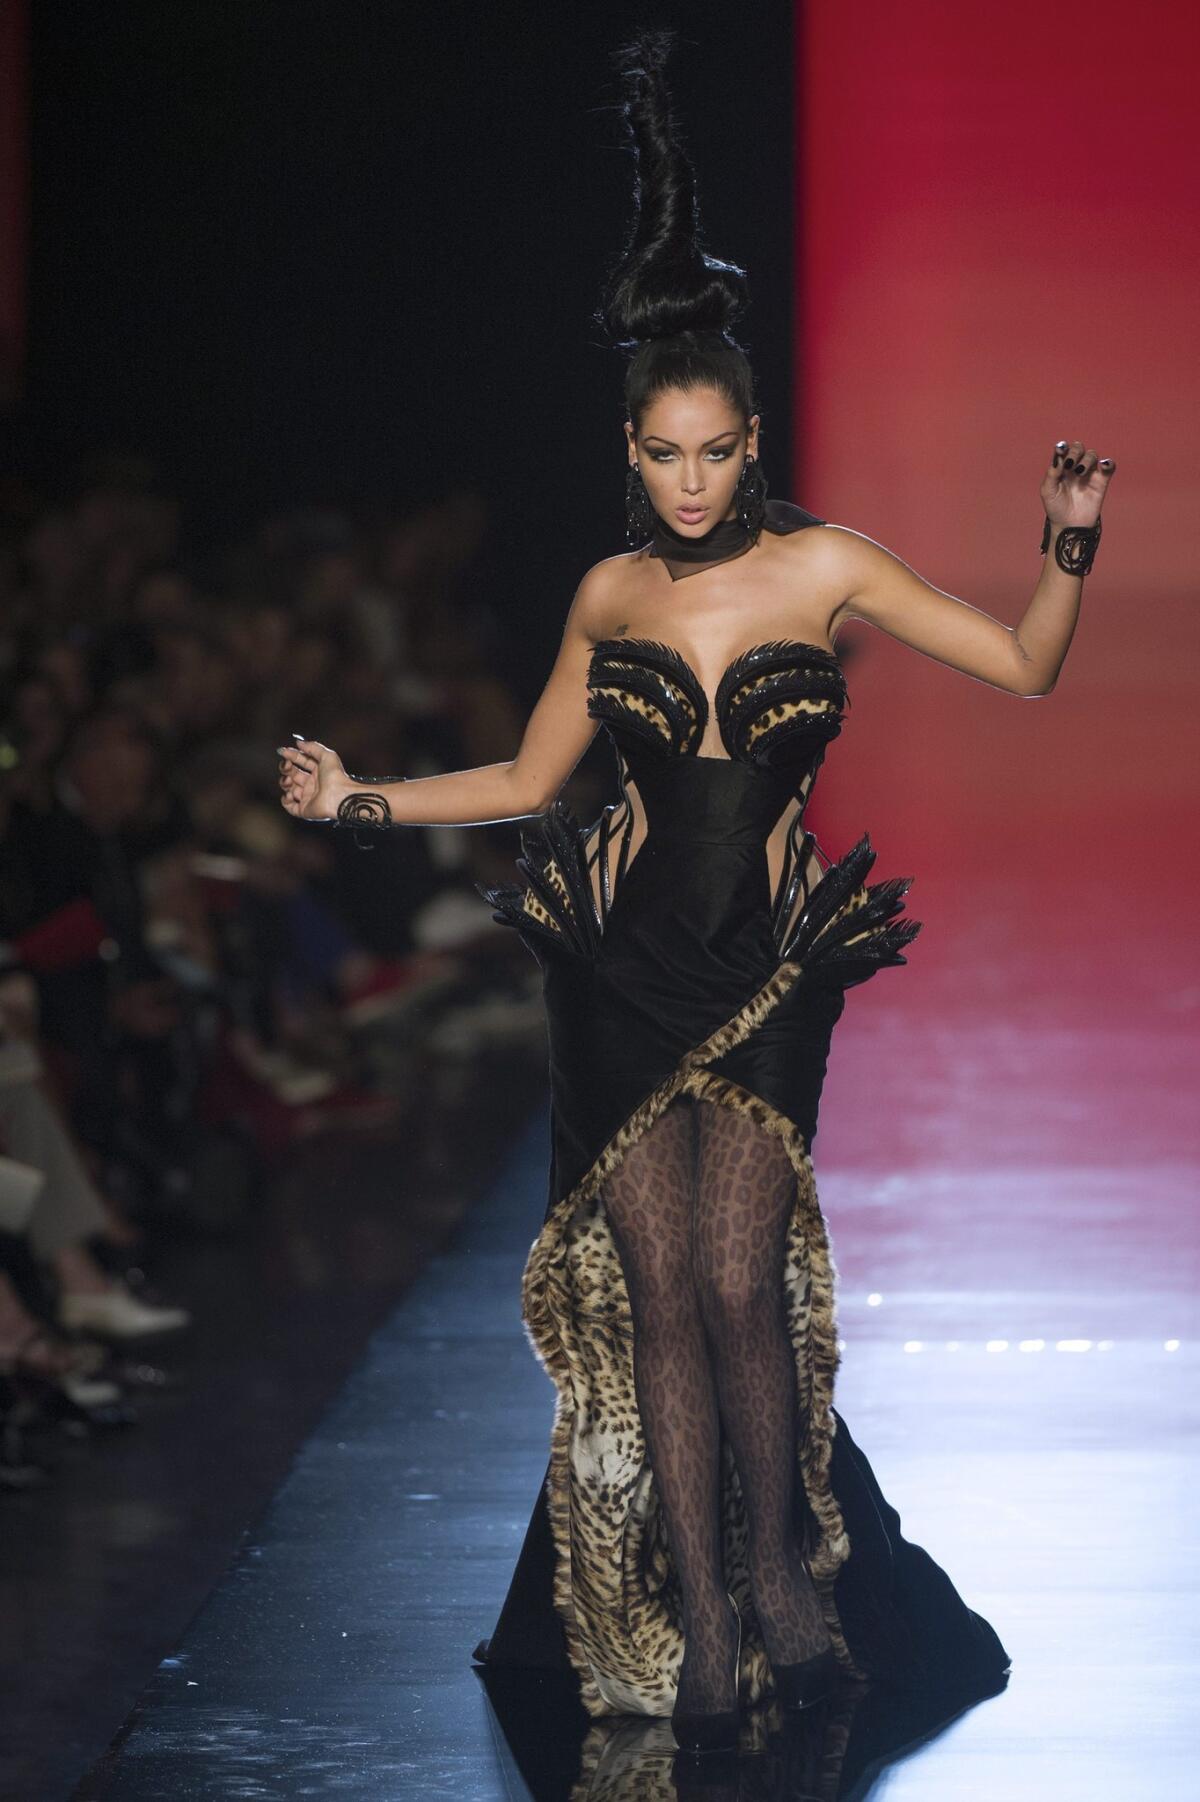 Television personality Nabilla Benattia presents a creation from the Haute Couture Fall-Winter 2013/14 Collection by French designer Jean Paul Gaultier during Paris Fashion Week on Wednesday.